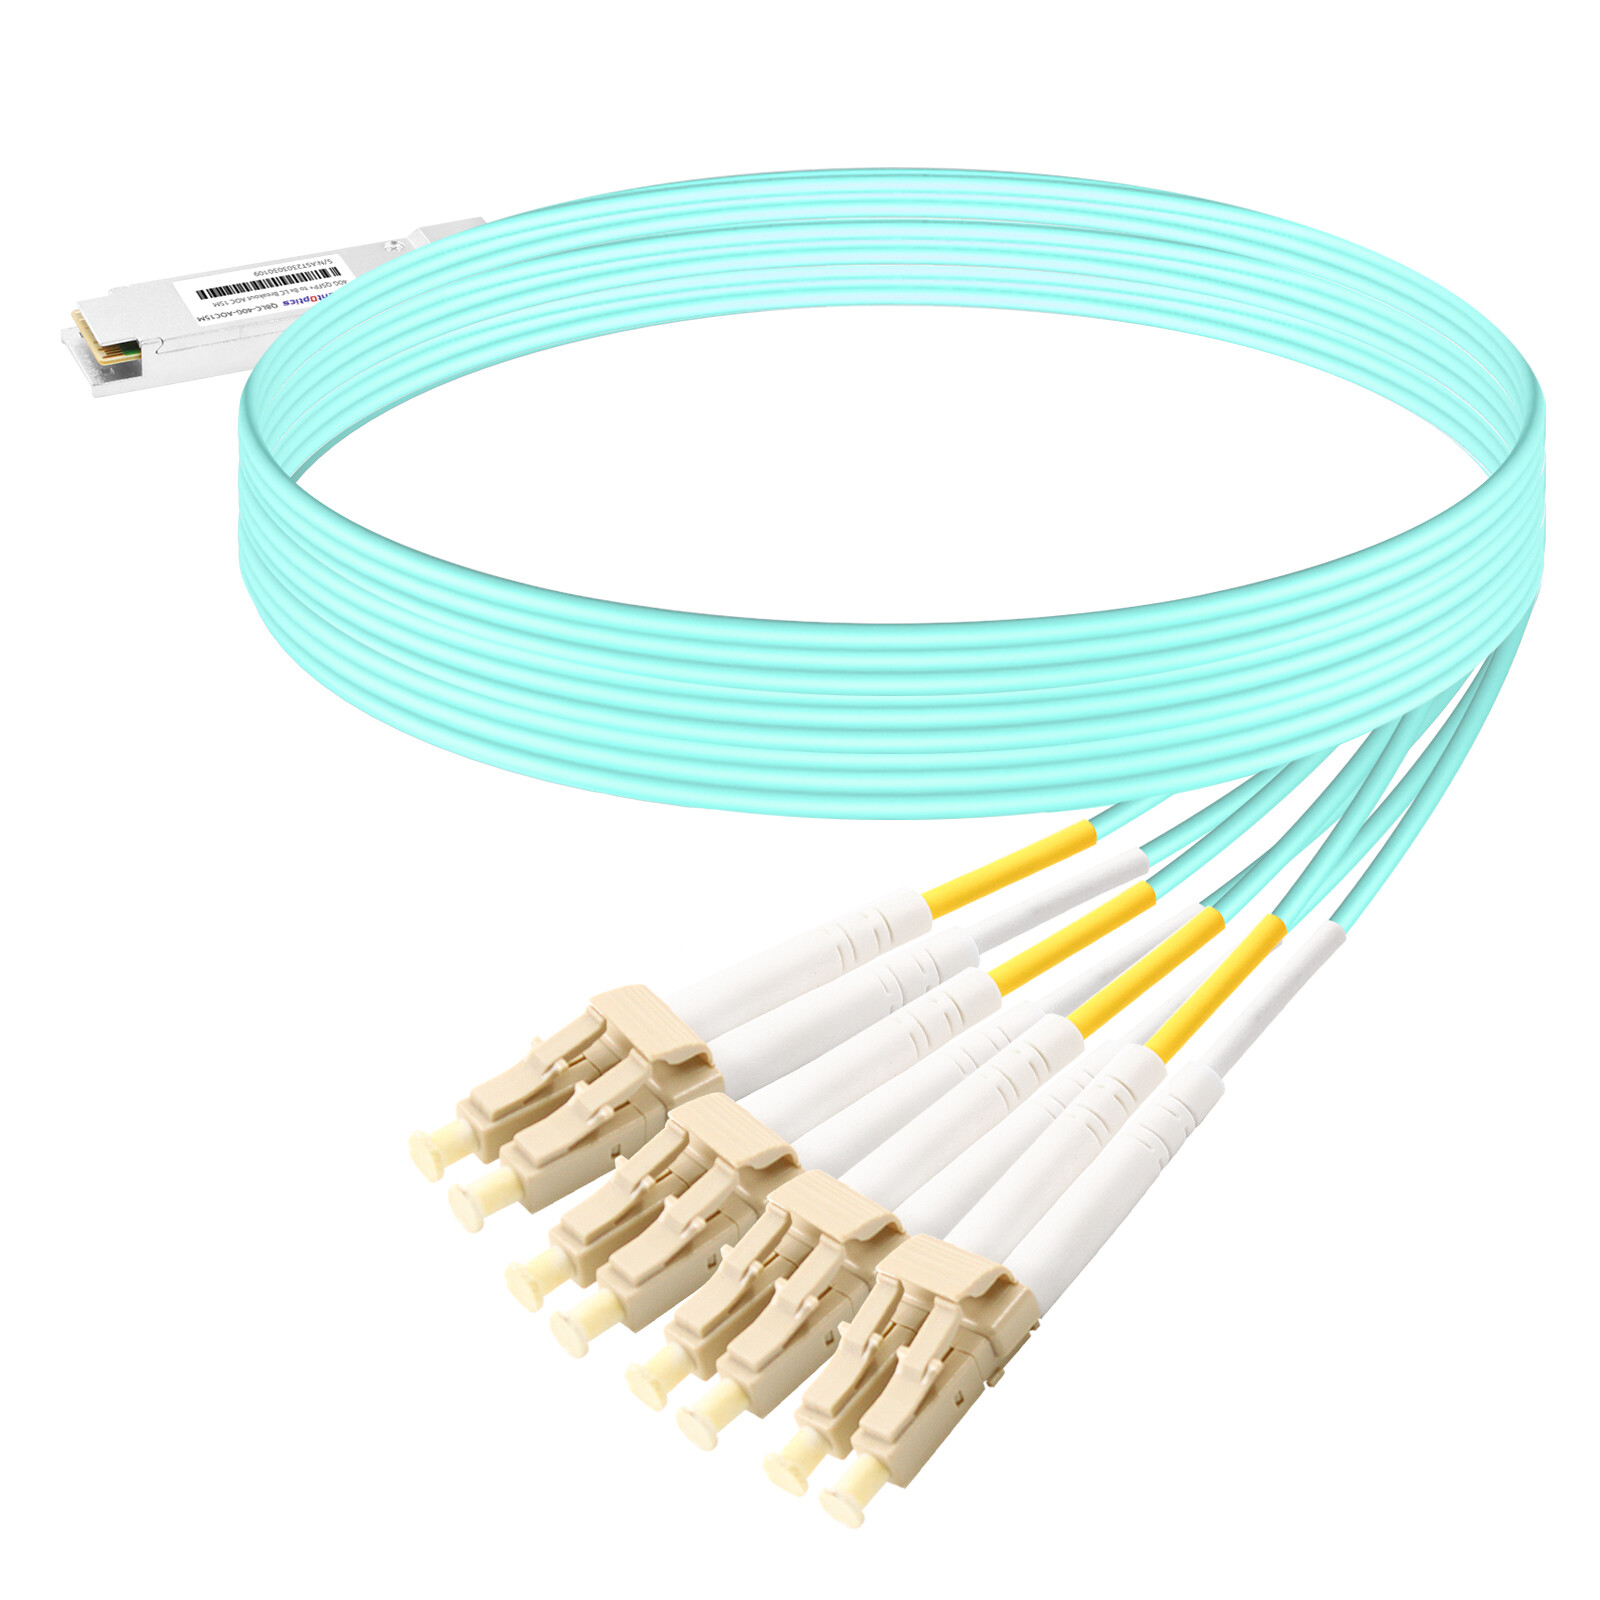 40G QSFP+ to 8x LC Breakout AOC Cable,15 Meters